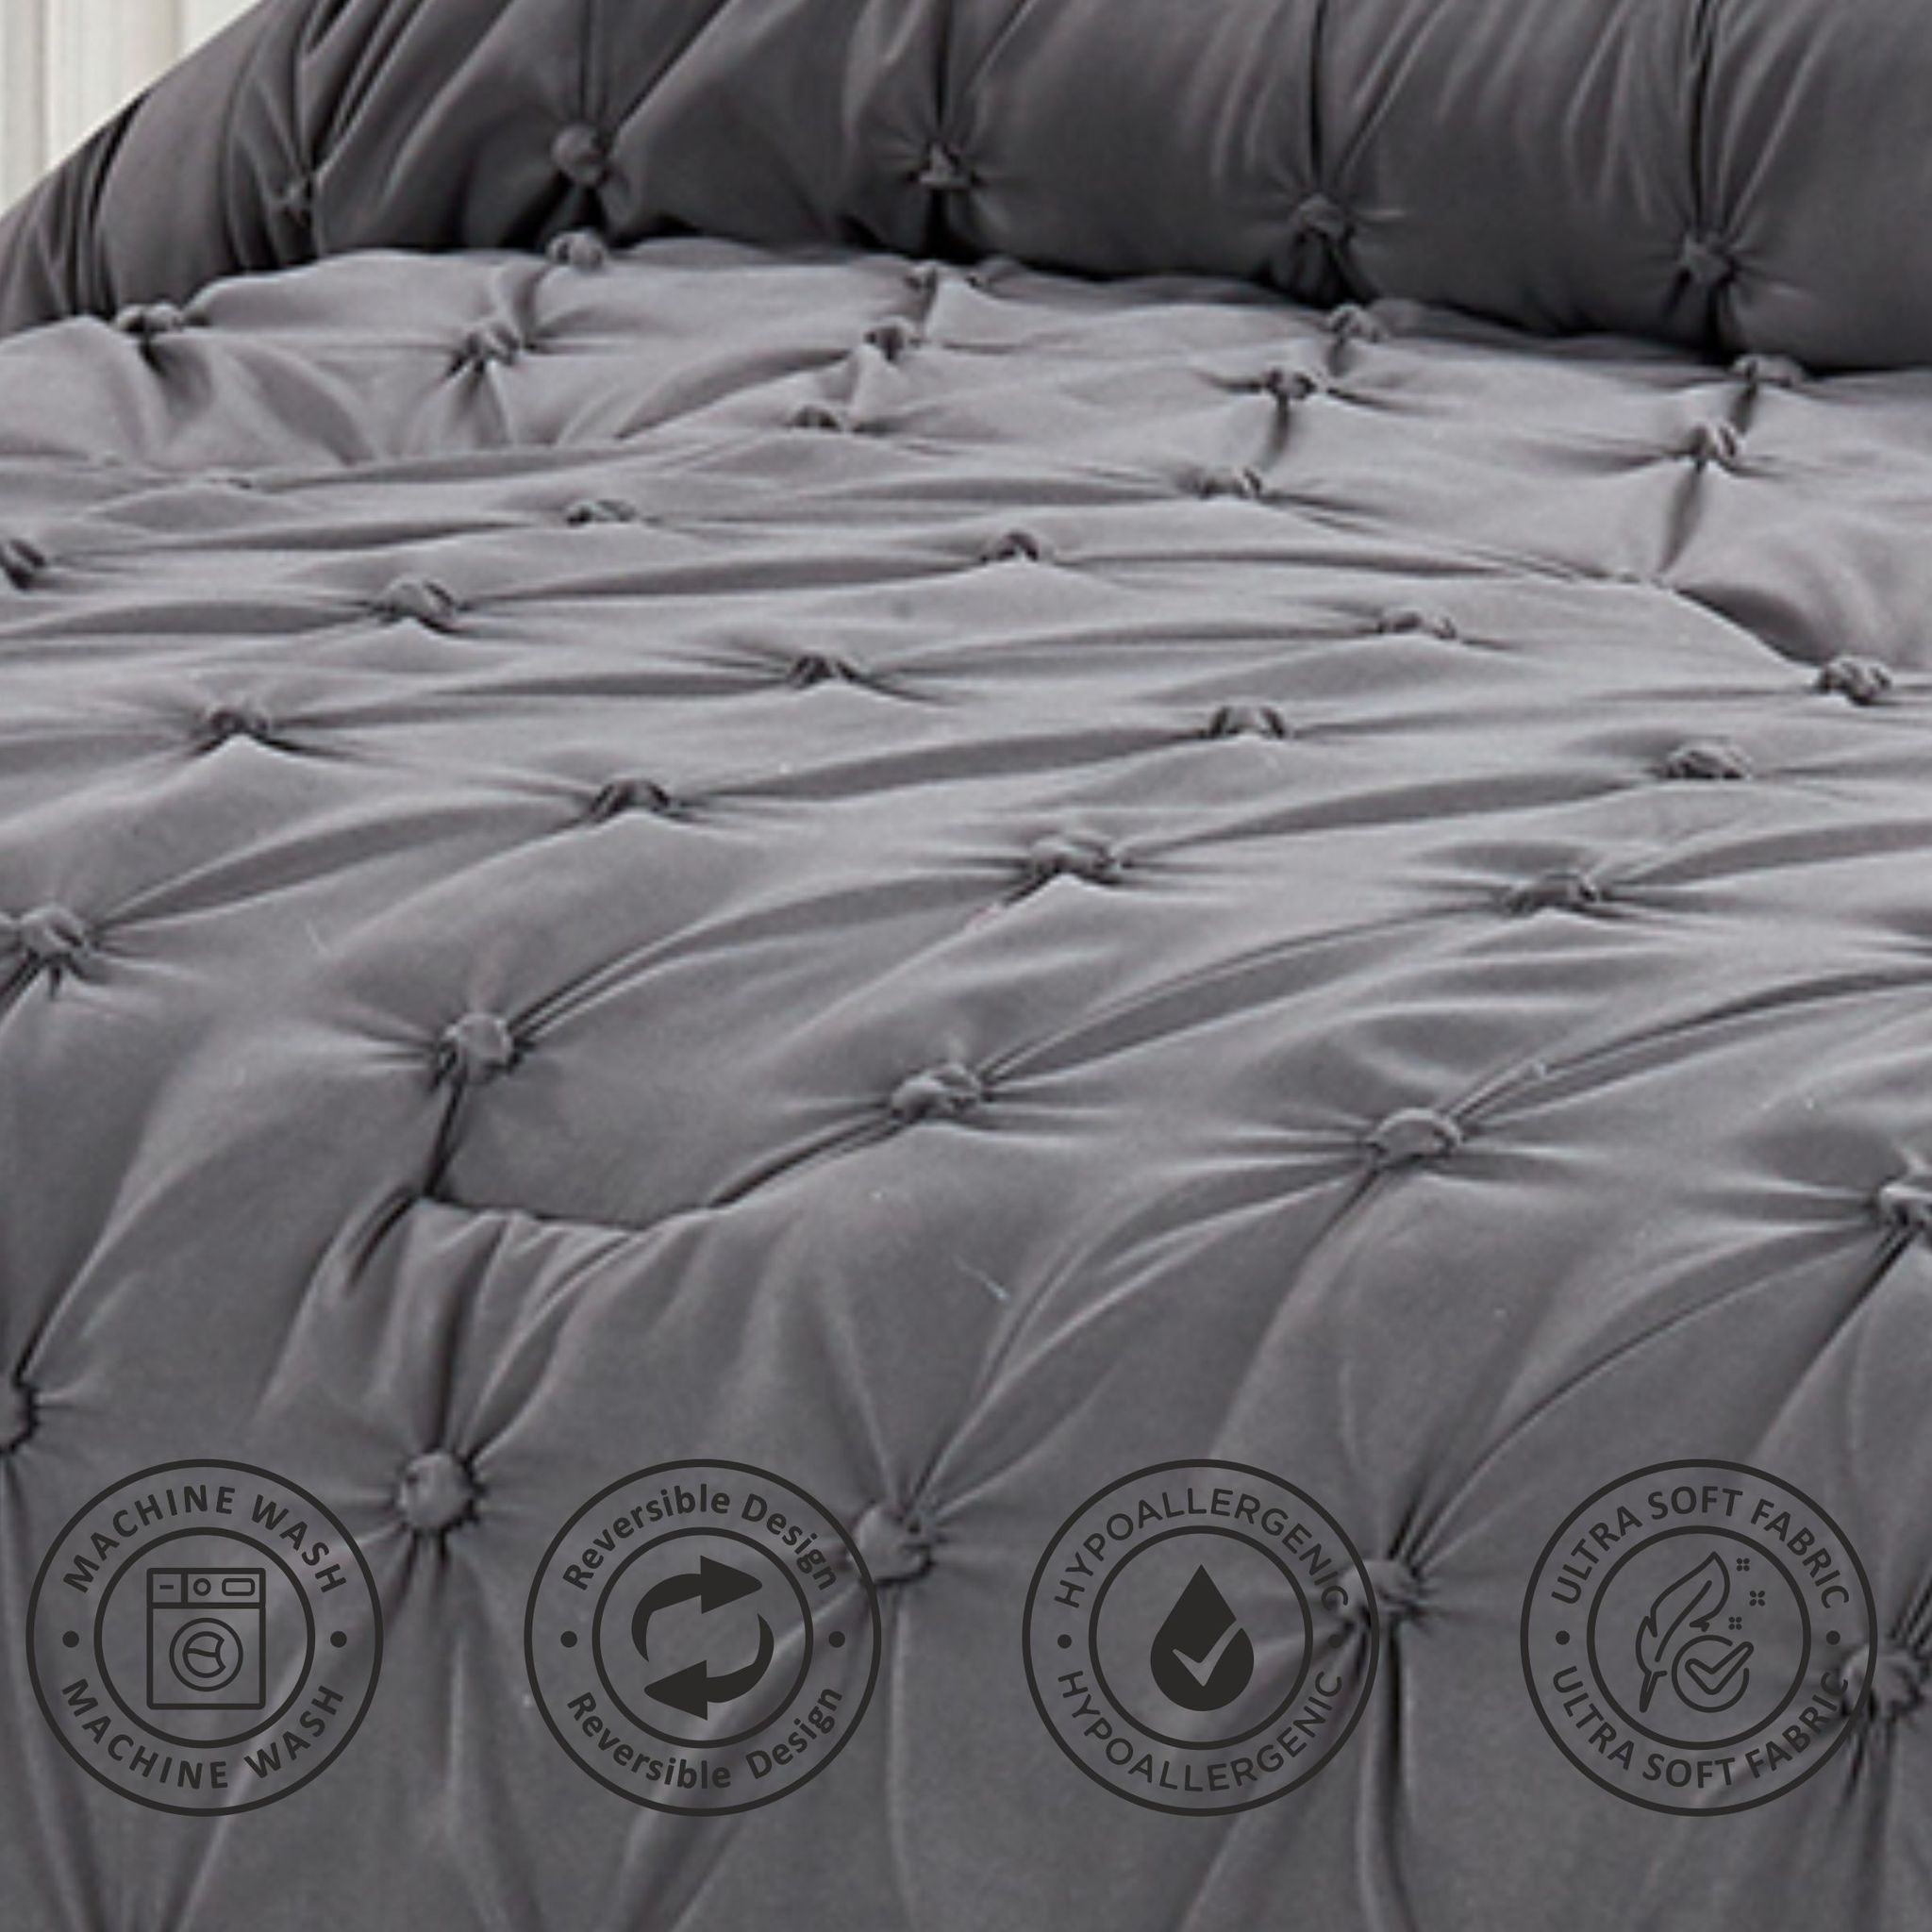 Bubble Embroidered Comforter Set 4-Piece Twin Grey